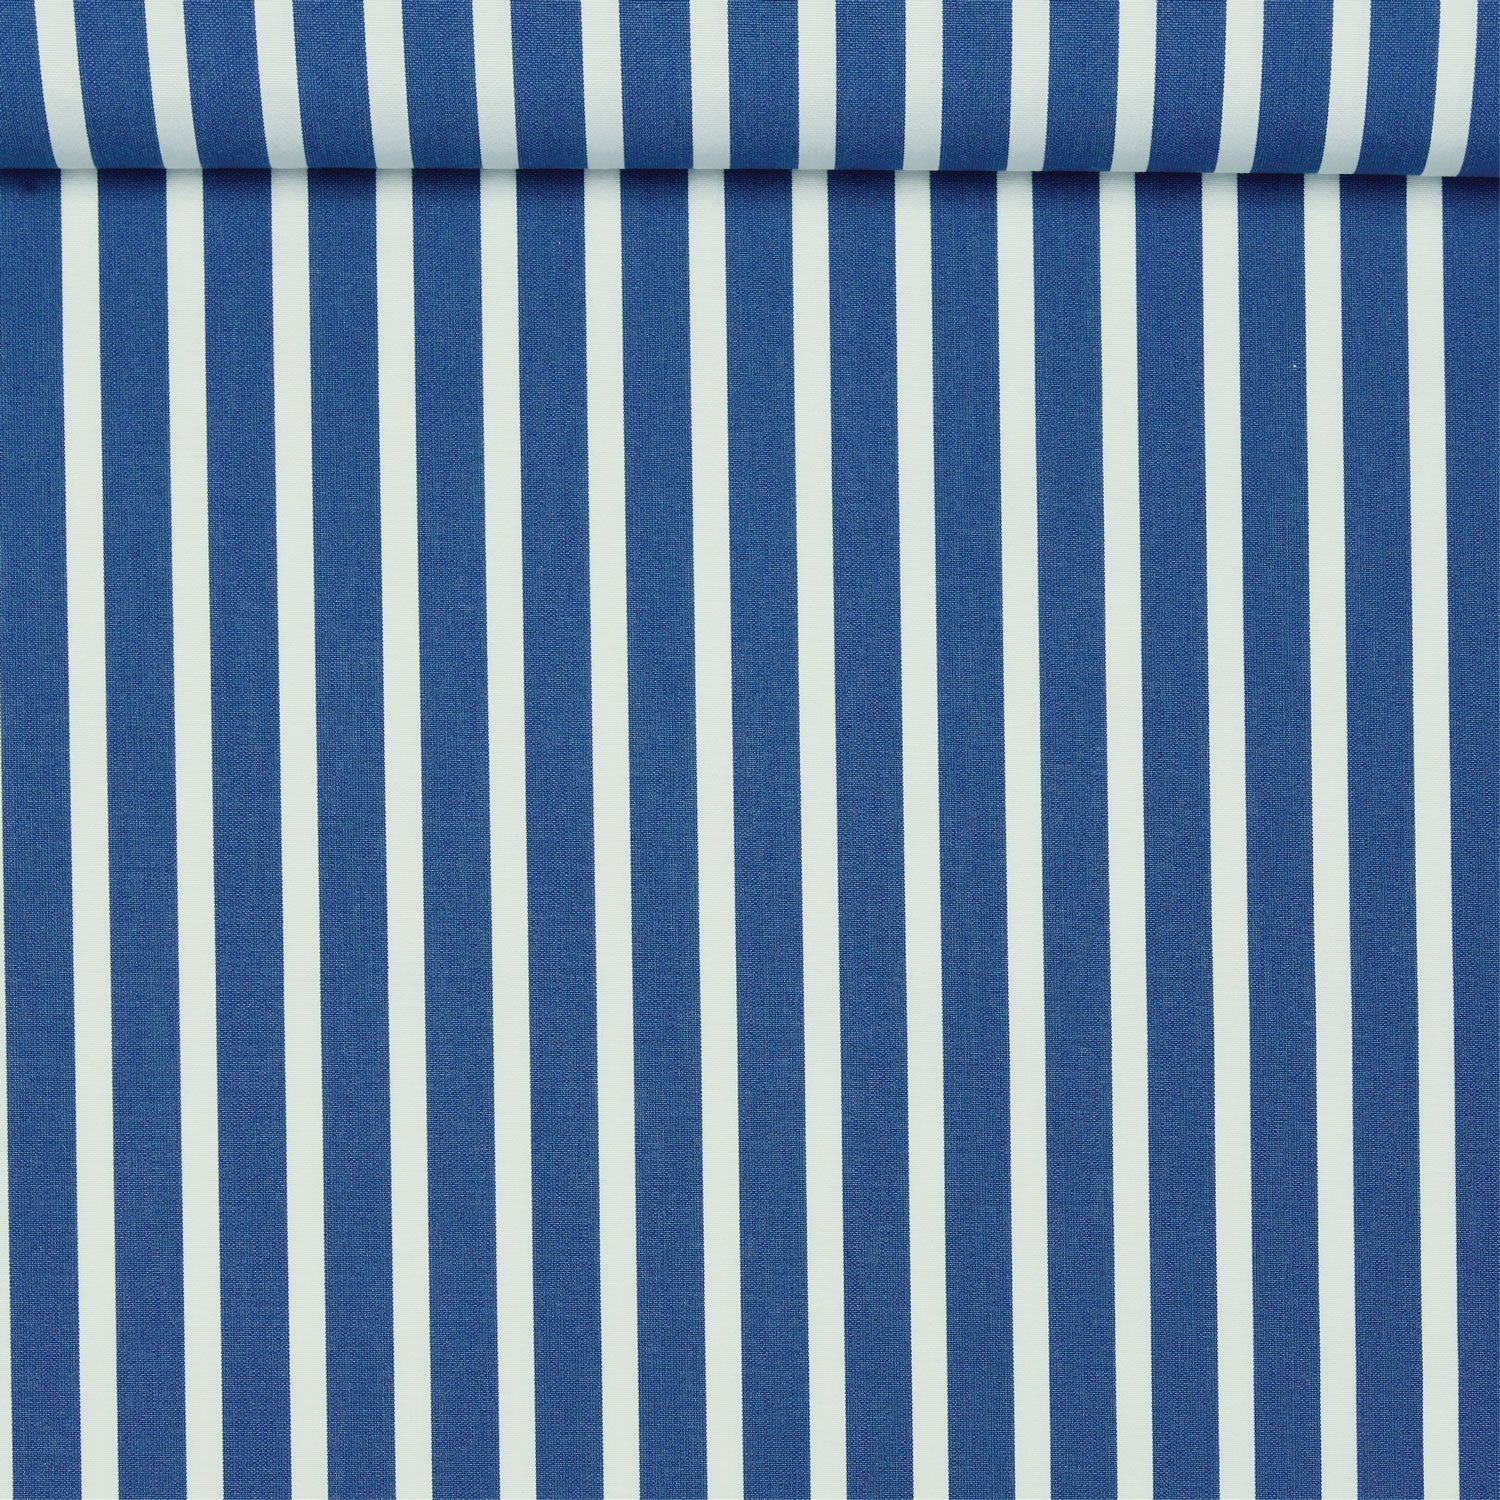 A blue and white striped solution dyed acrylic fabric used for luxury pool floats.